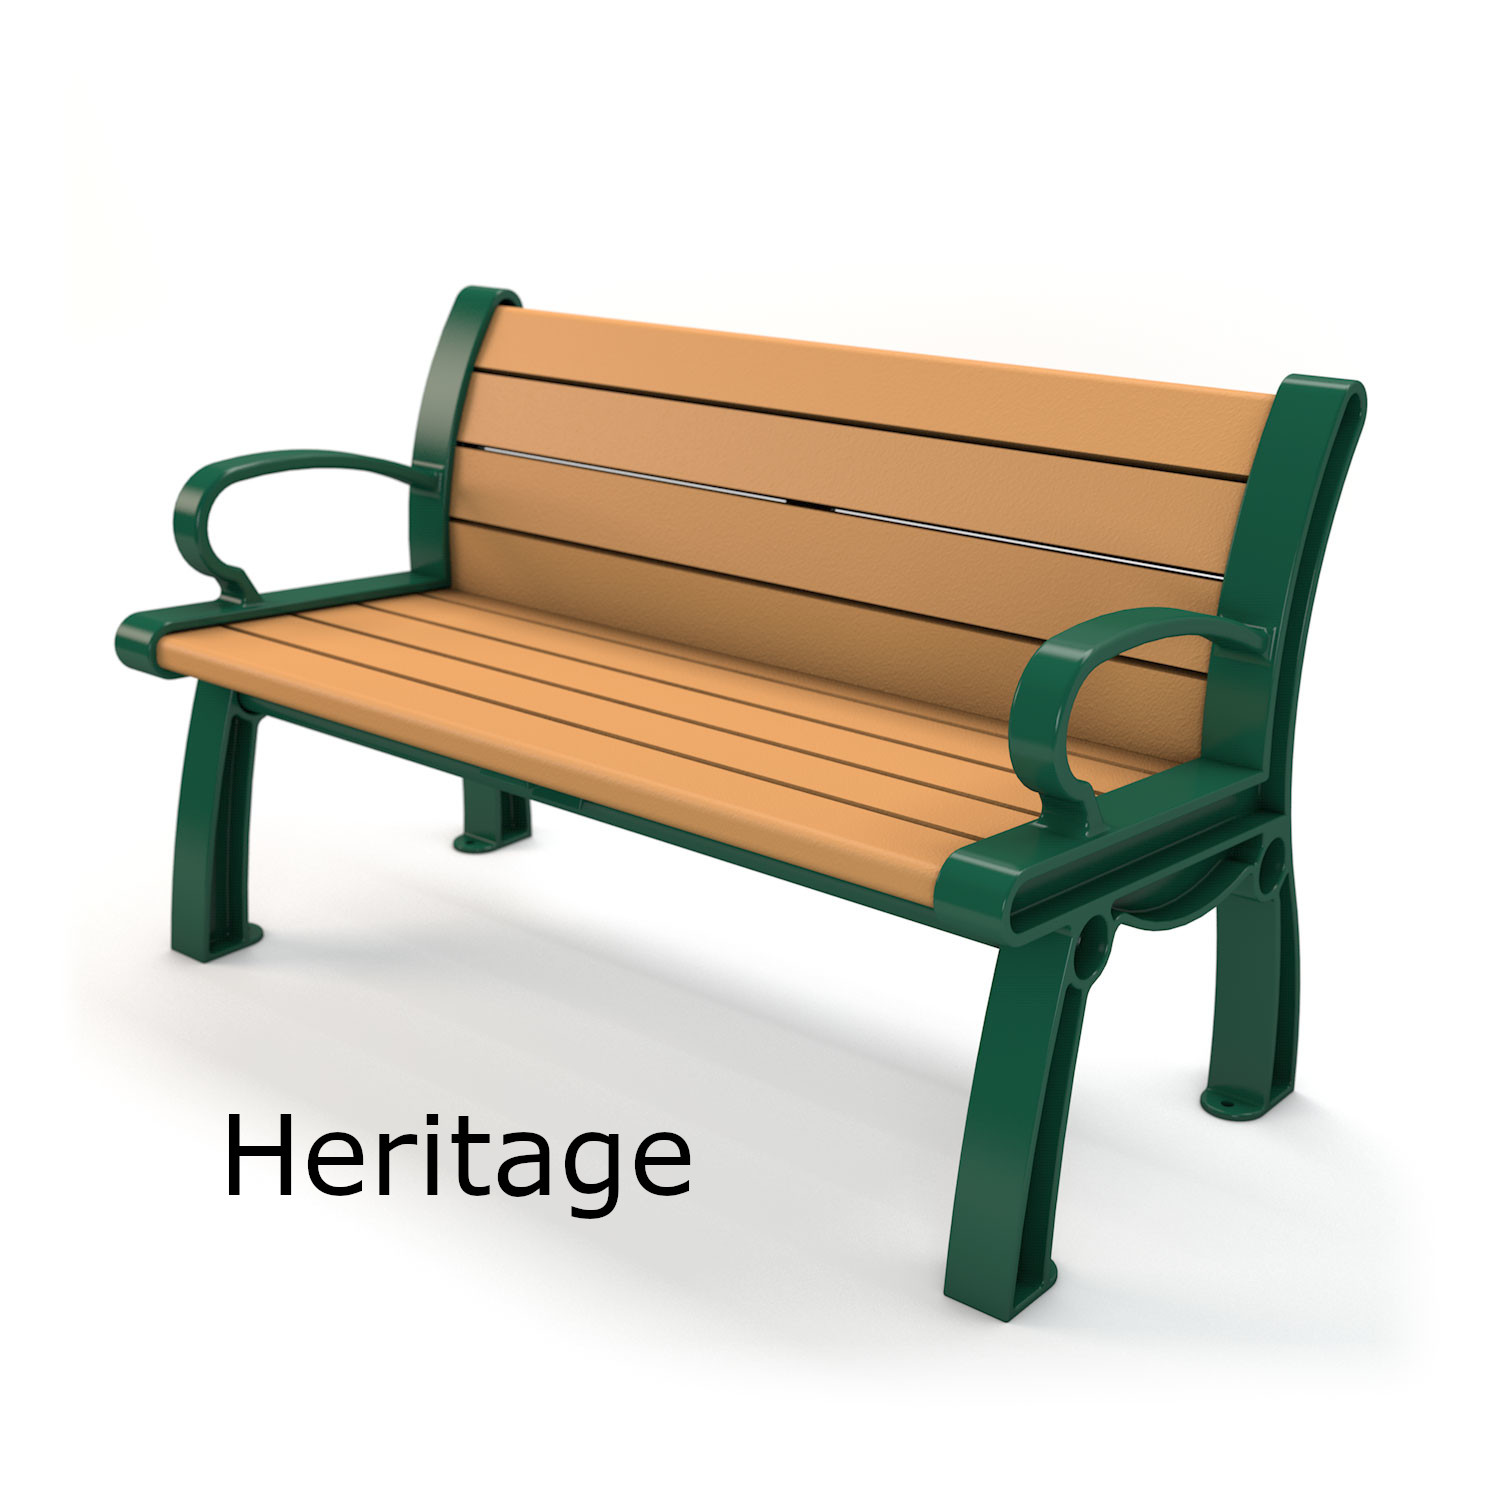 Heritage Recycled Plastic Lumber Park Bench